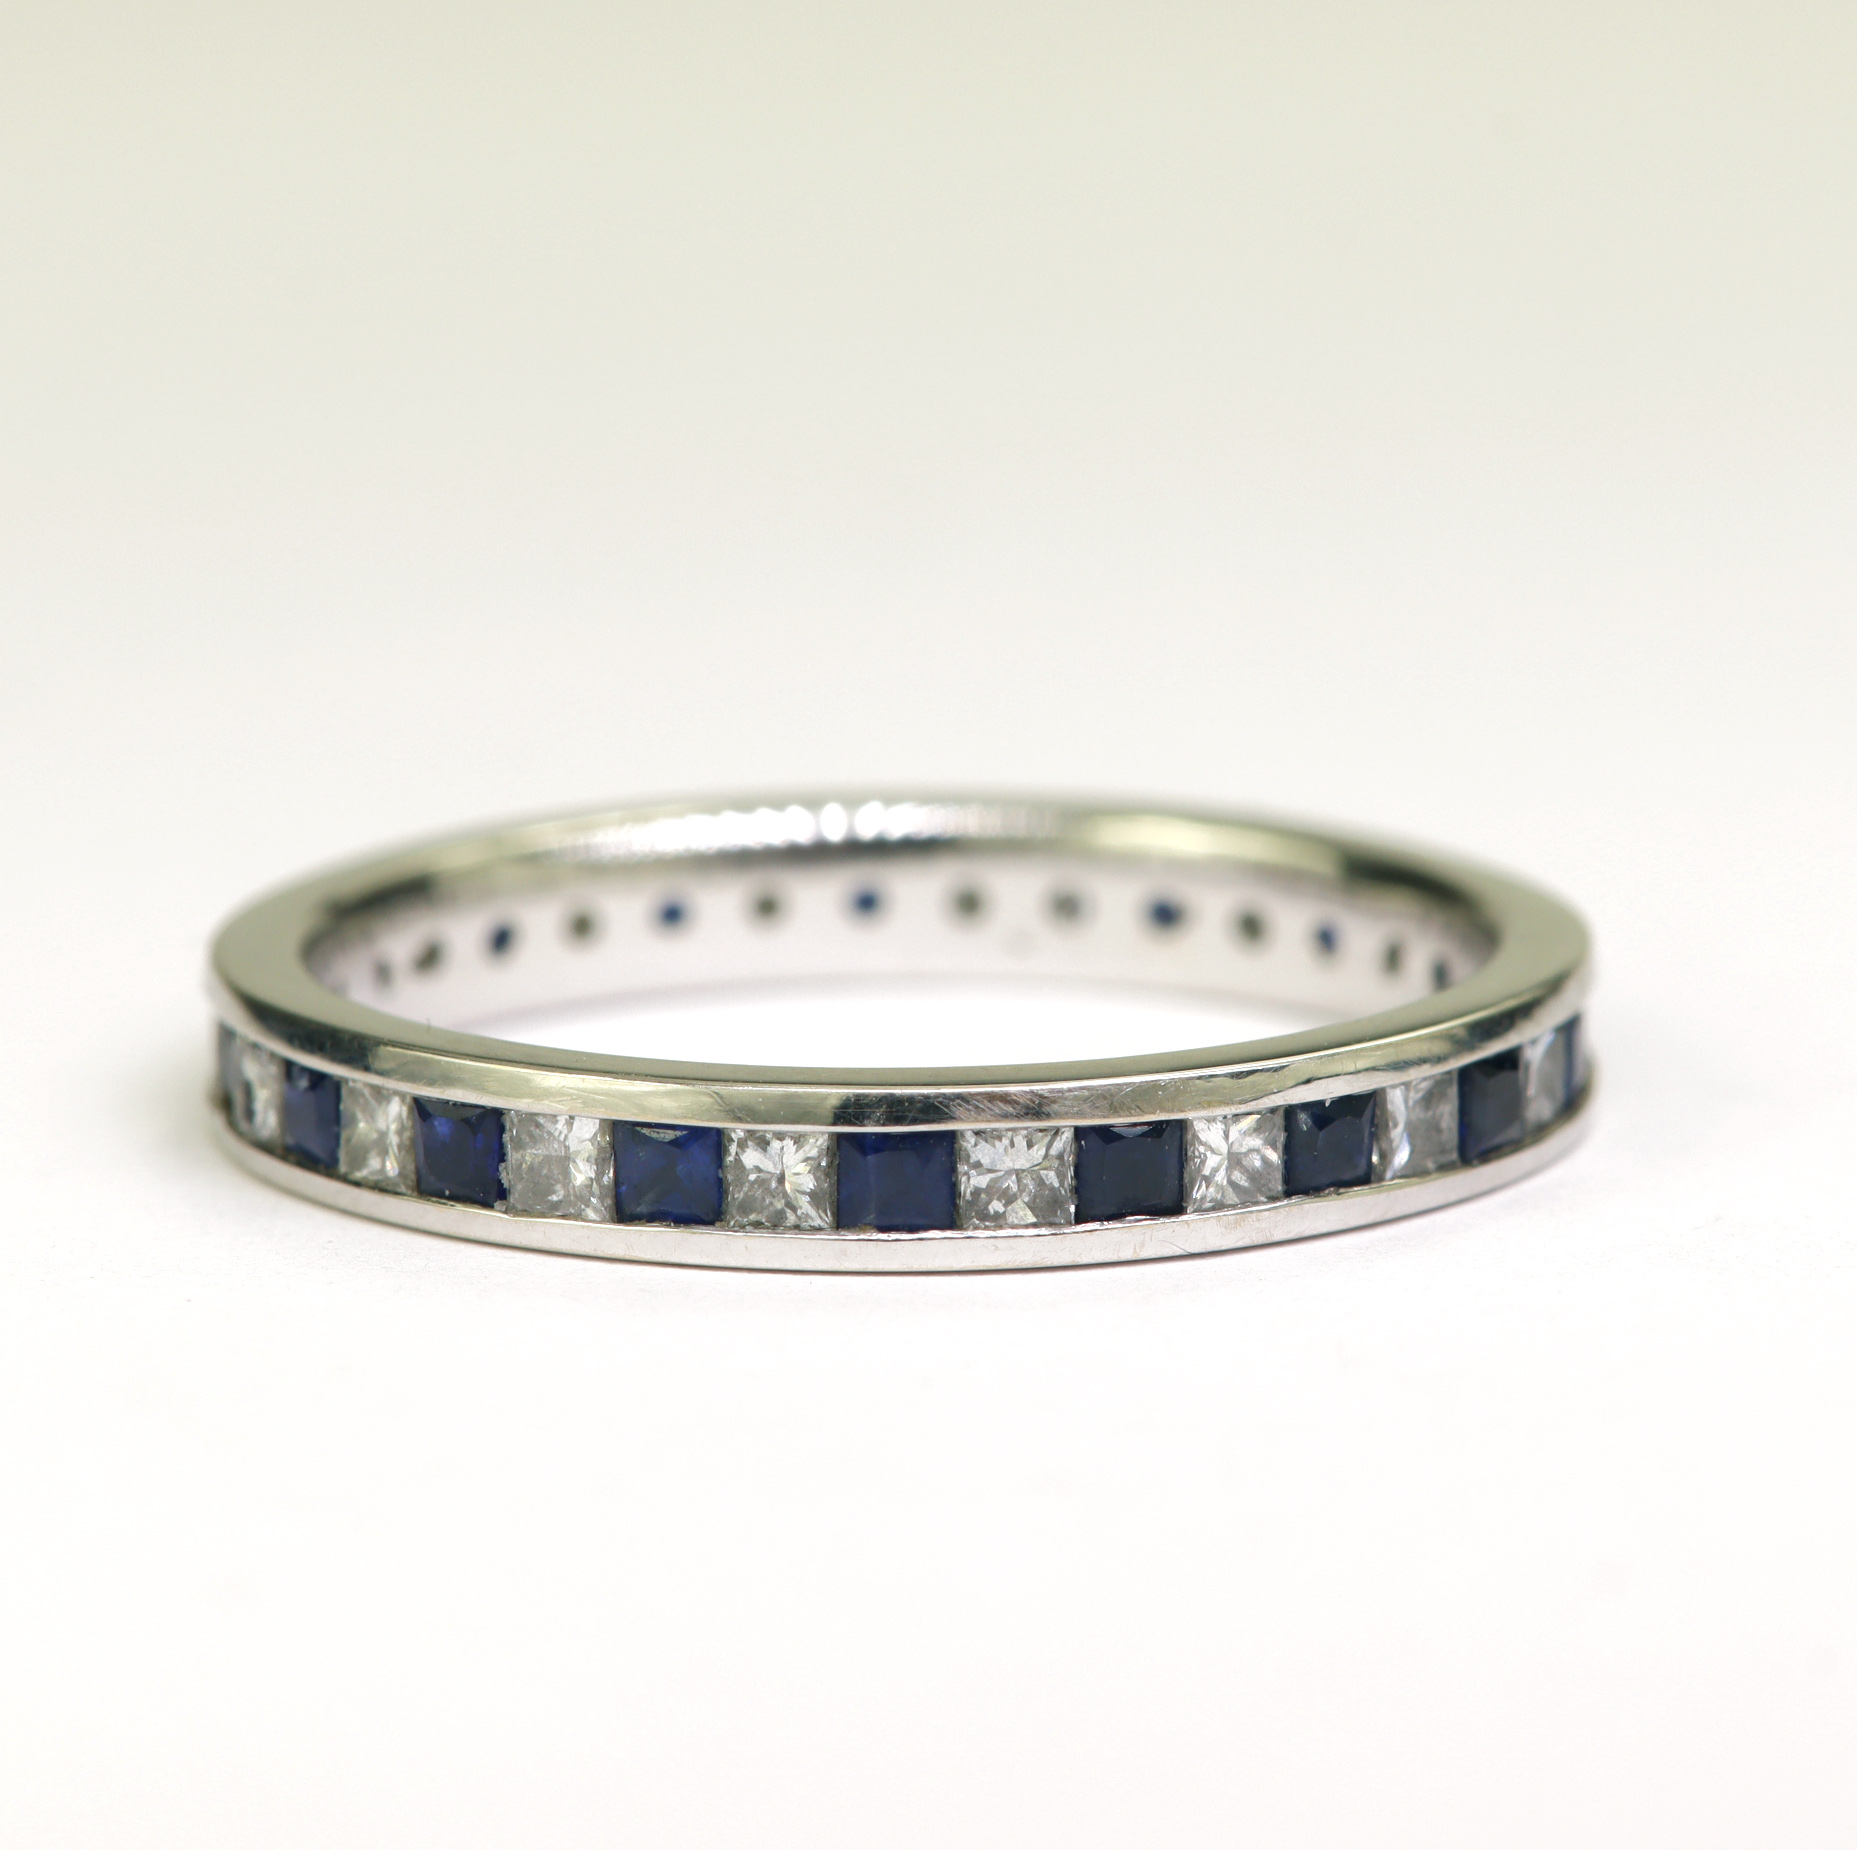 18ct white gold Abelini sapphire and diamond full eternity ring, set with eighteen princess cut